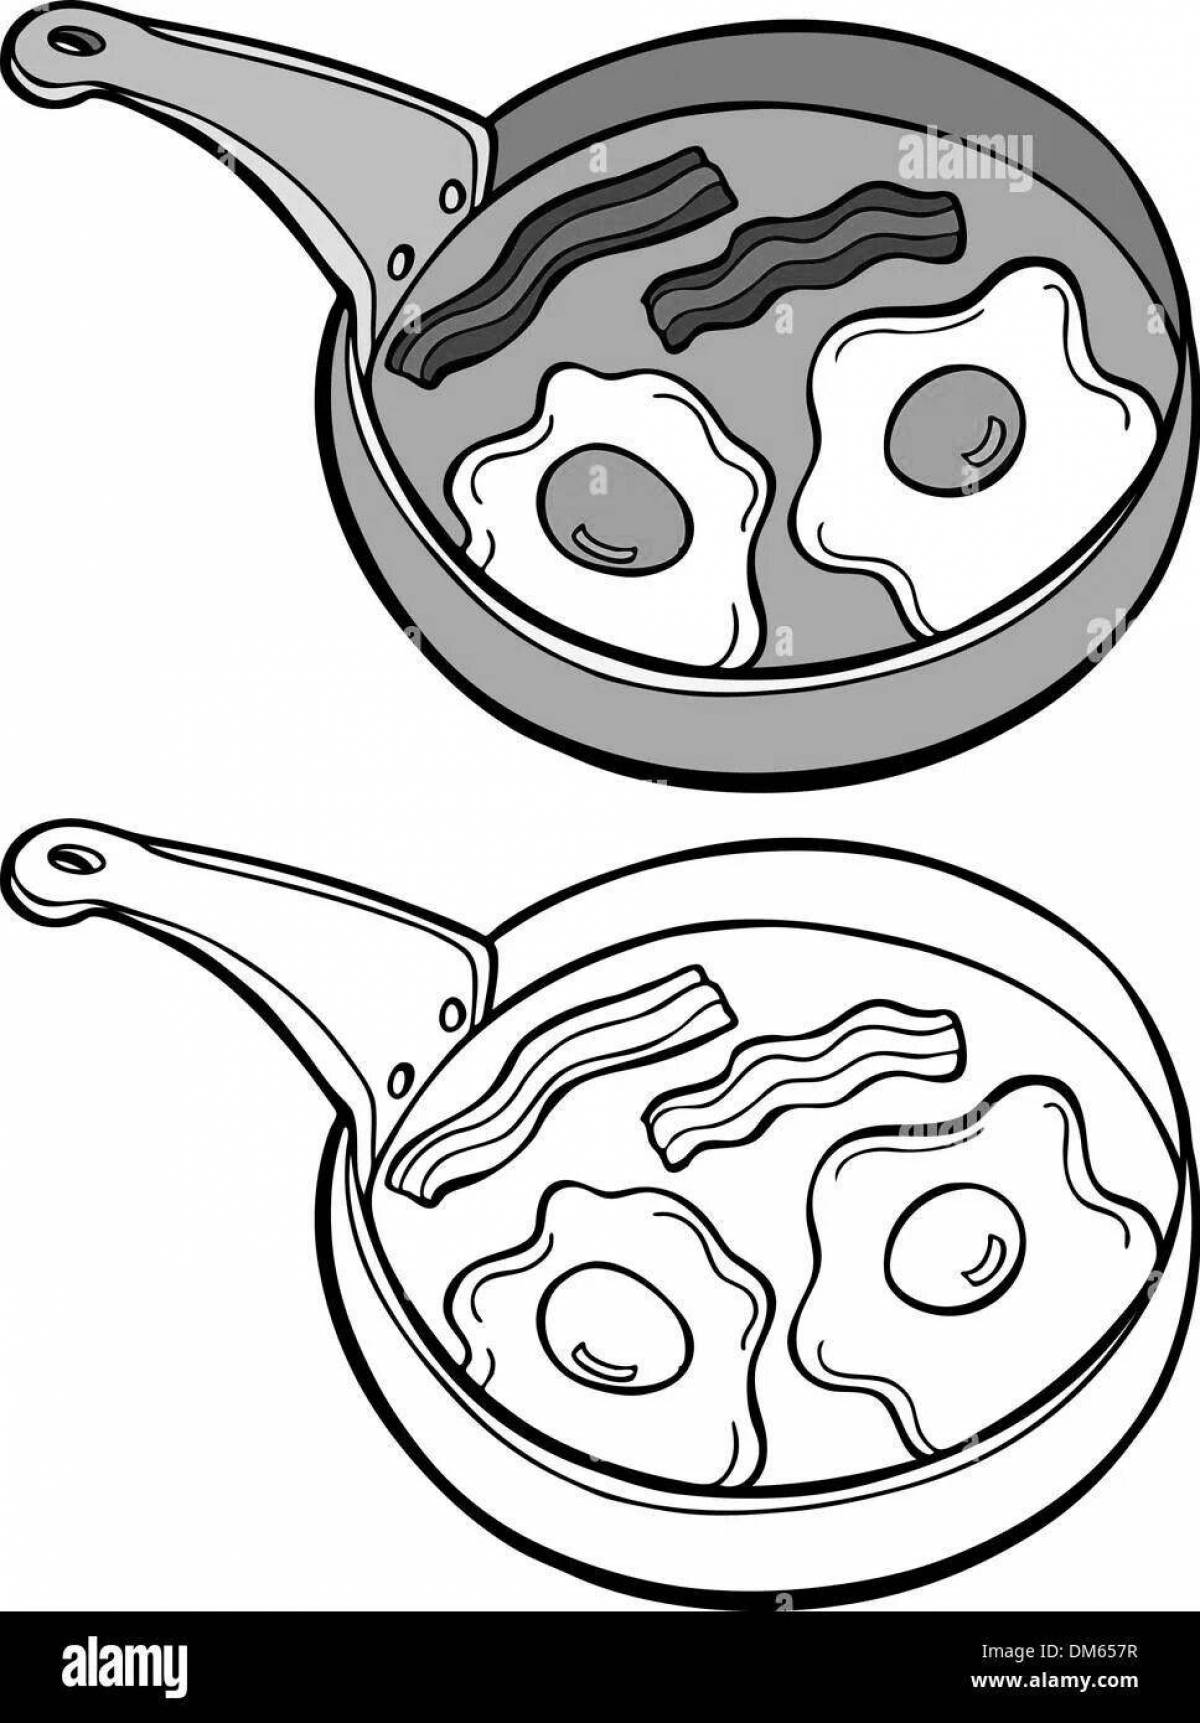 Awesome omelet coloring page